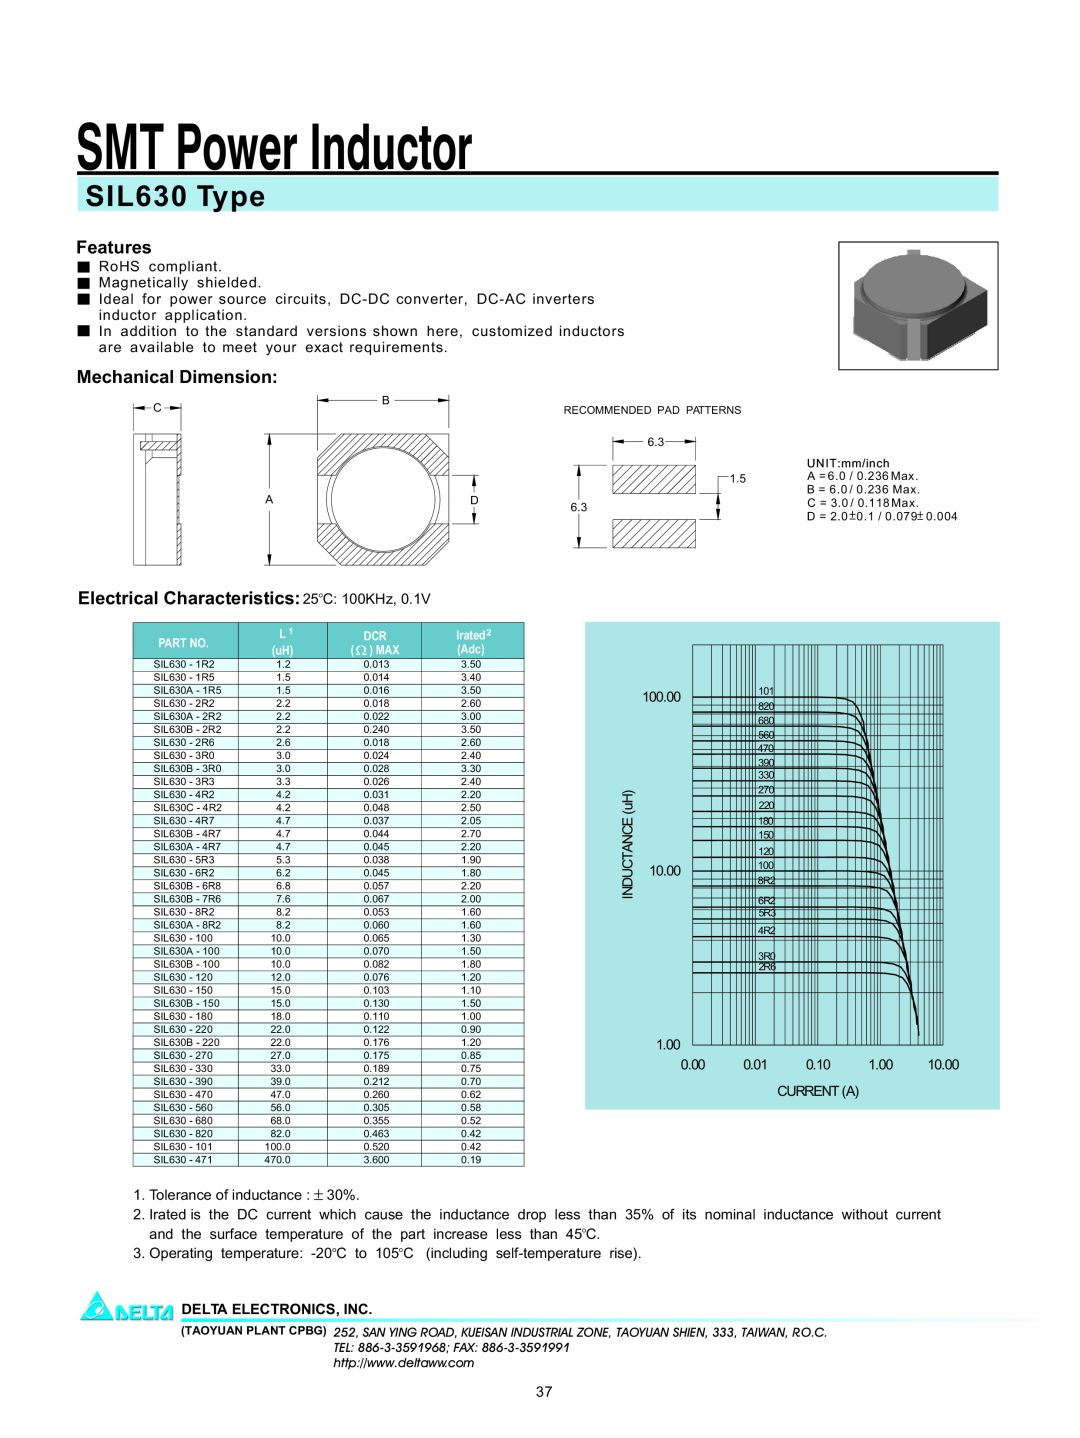 Delta Electronics manual SMT Power Inductor, SIL630 Type, Features, Mechanical Dimension, Tolerance of inductance 